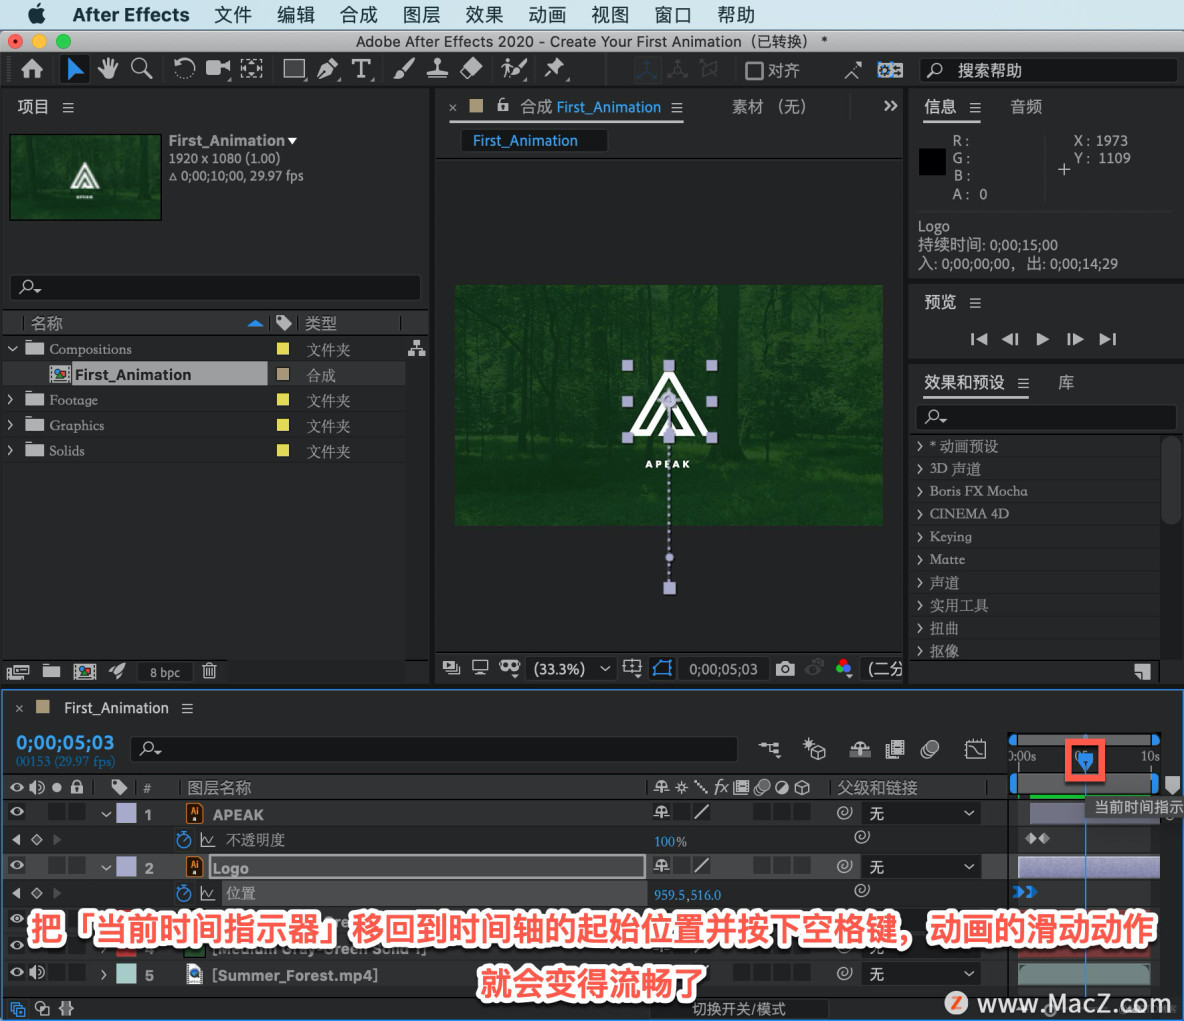 After Effects 教程，如何在 After Effects 中创建动画？_AE_11